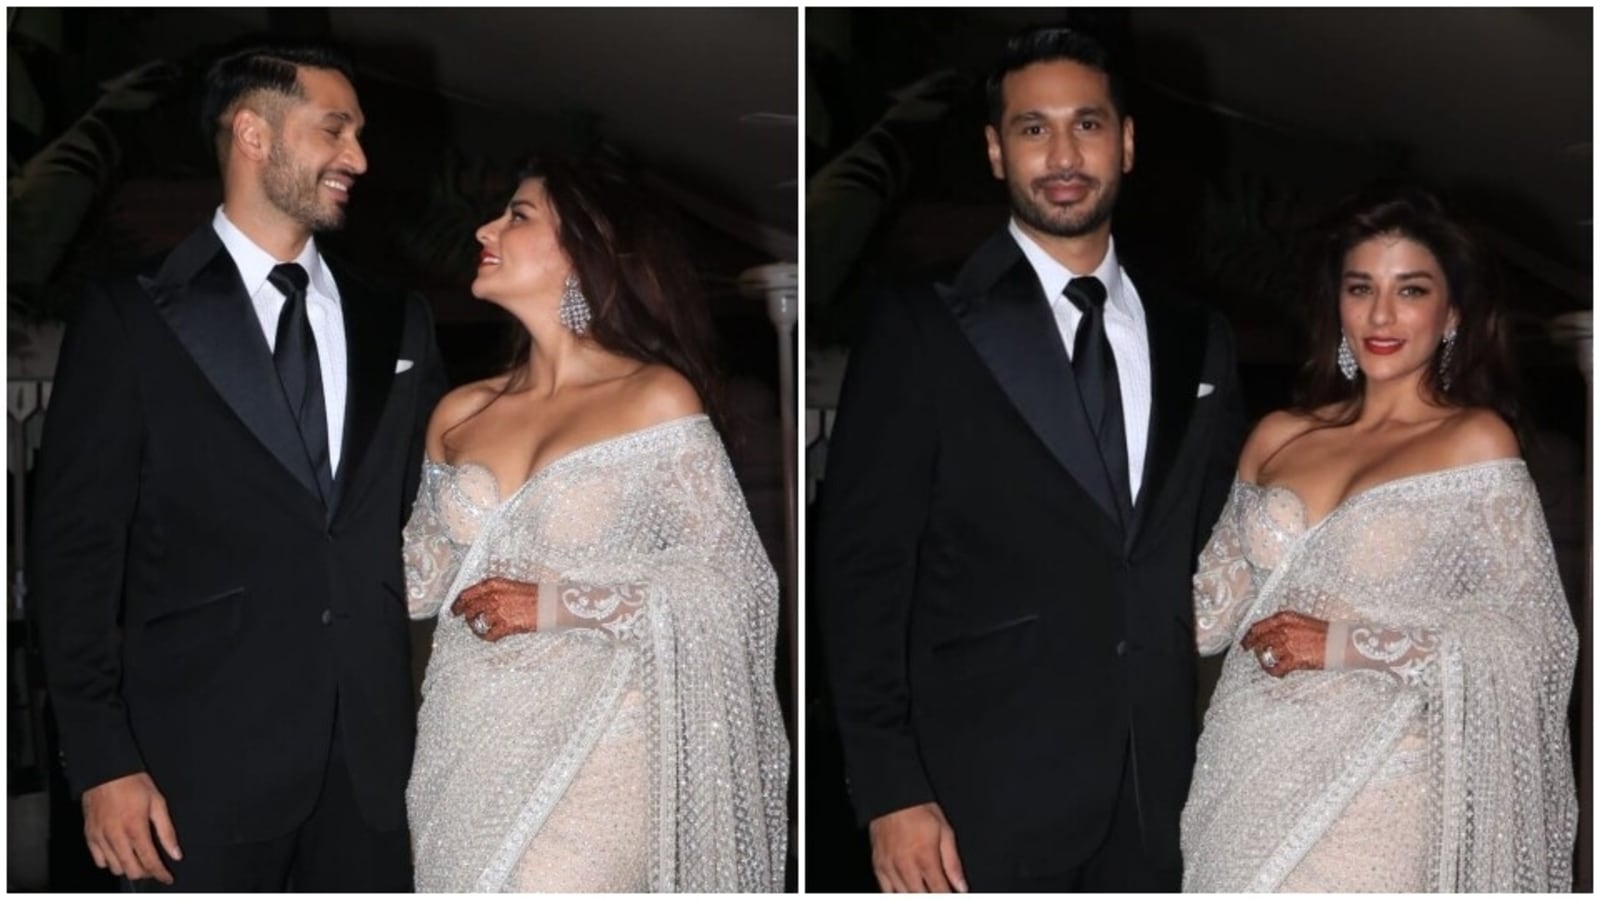 Arjun Kanungo and his wife Carla Dennis host wedding reception, here’s what the couple wore. All pics, video inside